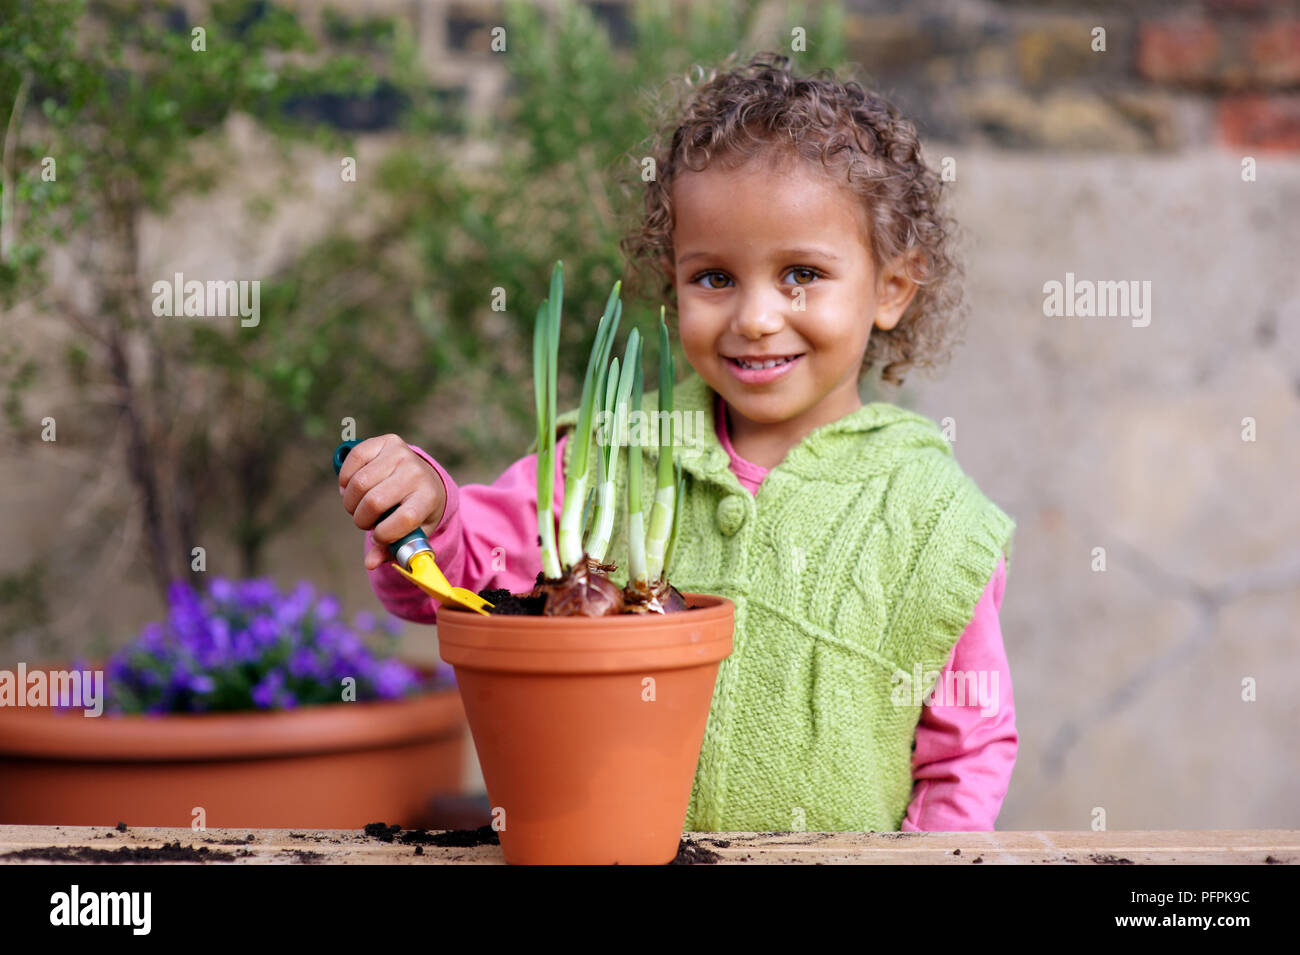 Girl (3.5 years) holding trowel next to flowerpot containing daffodil bulbs Stock Photo